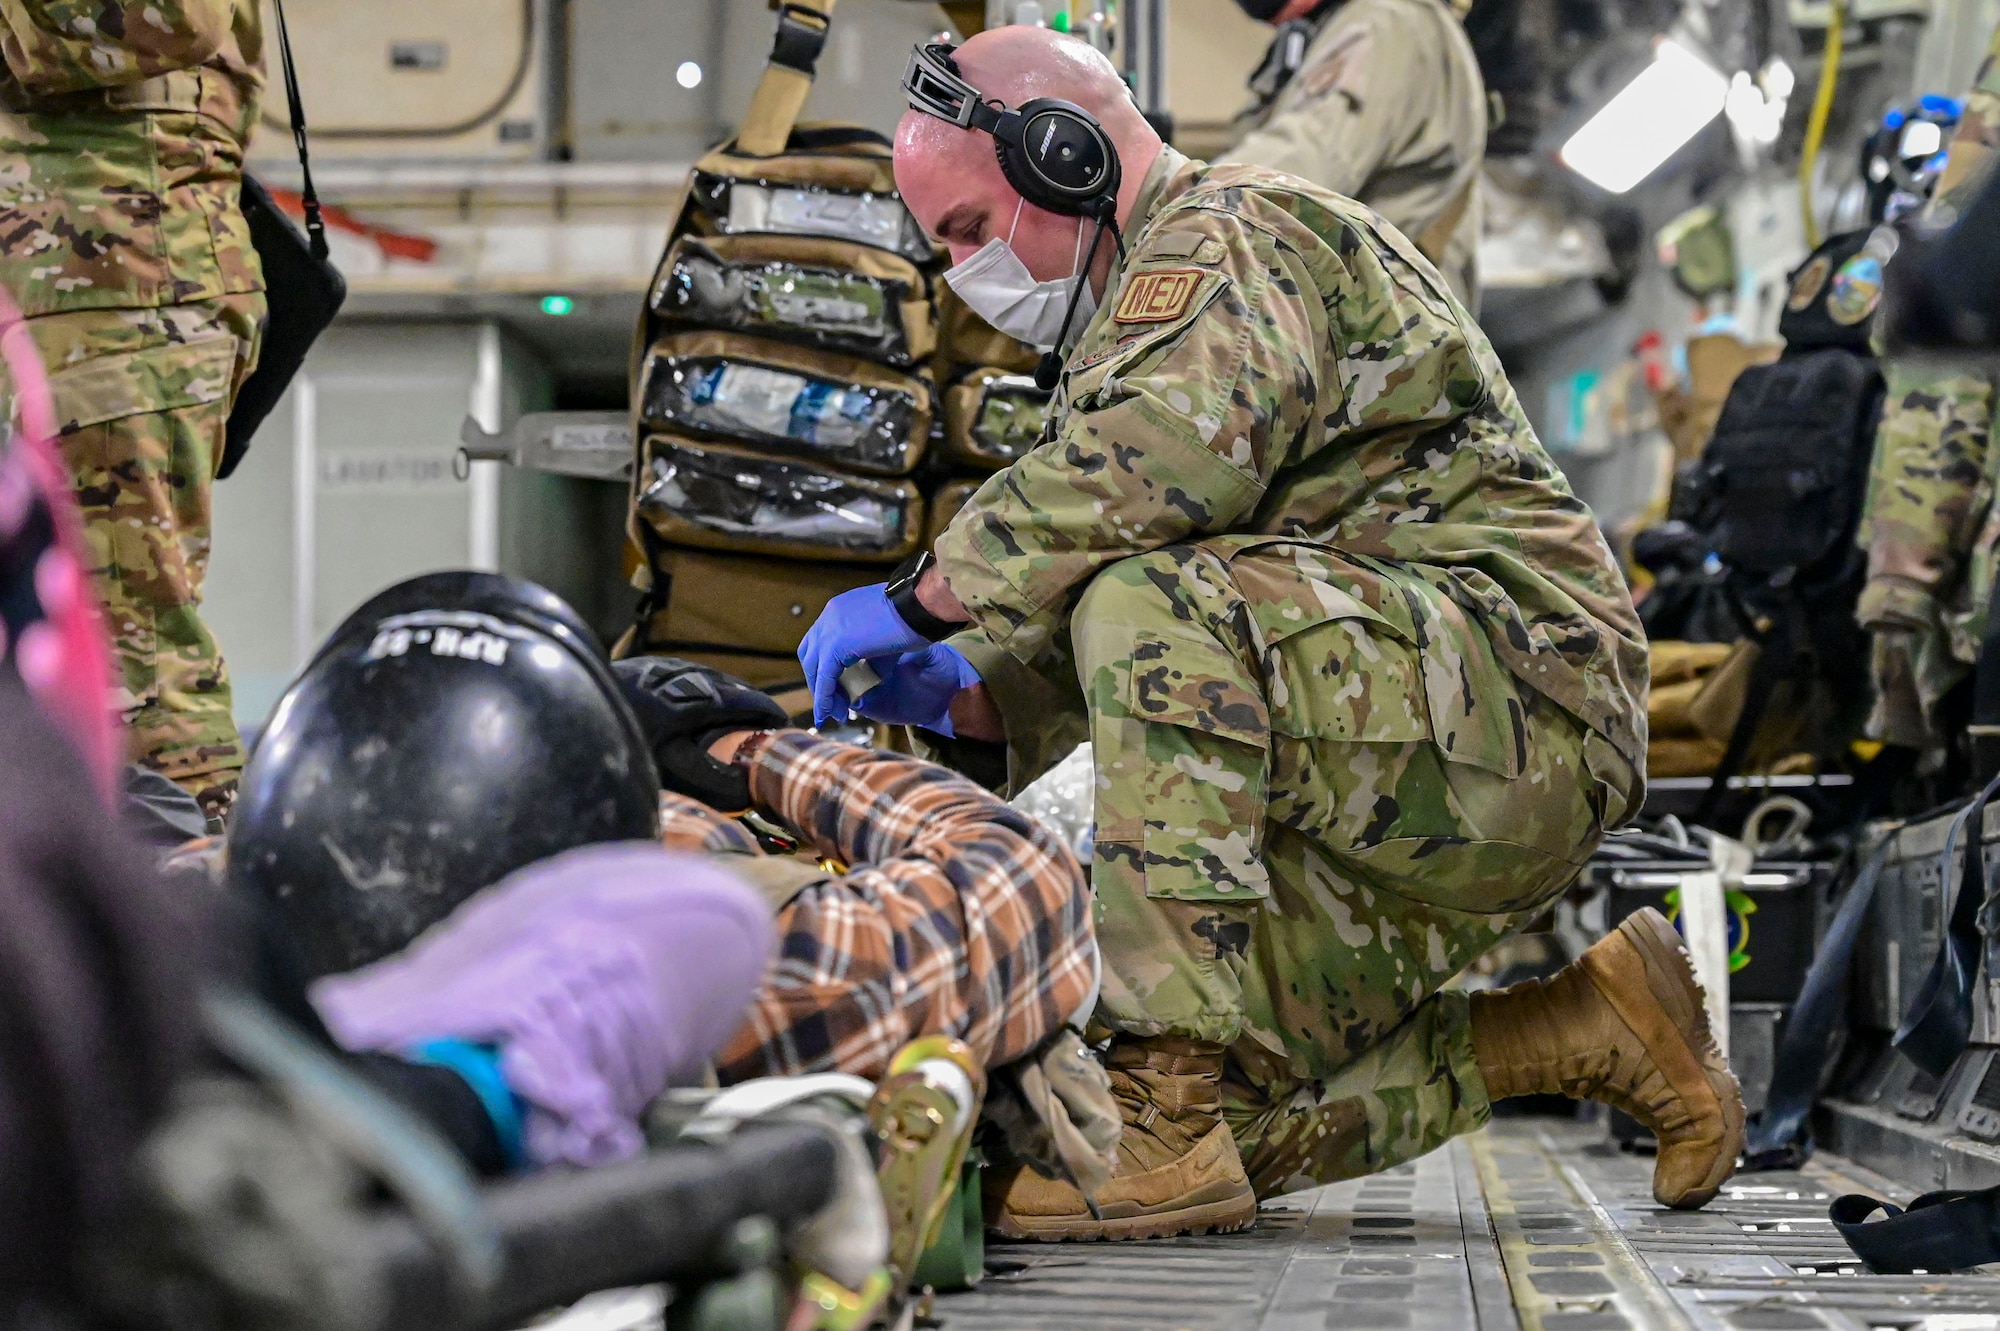 A person provides care to a patient with simulated injuries during an Aeromedical Evacuation exercise